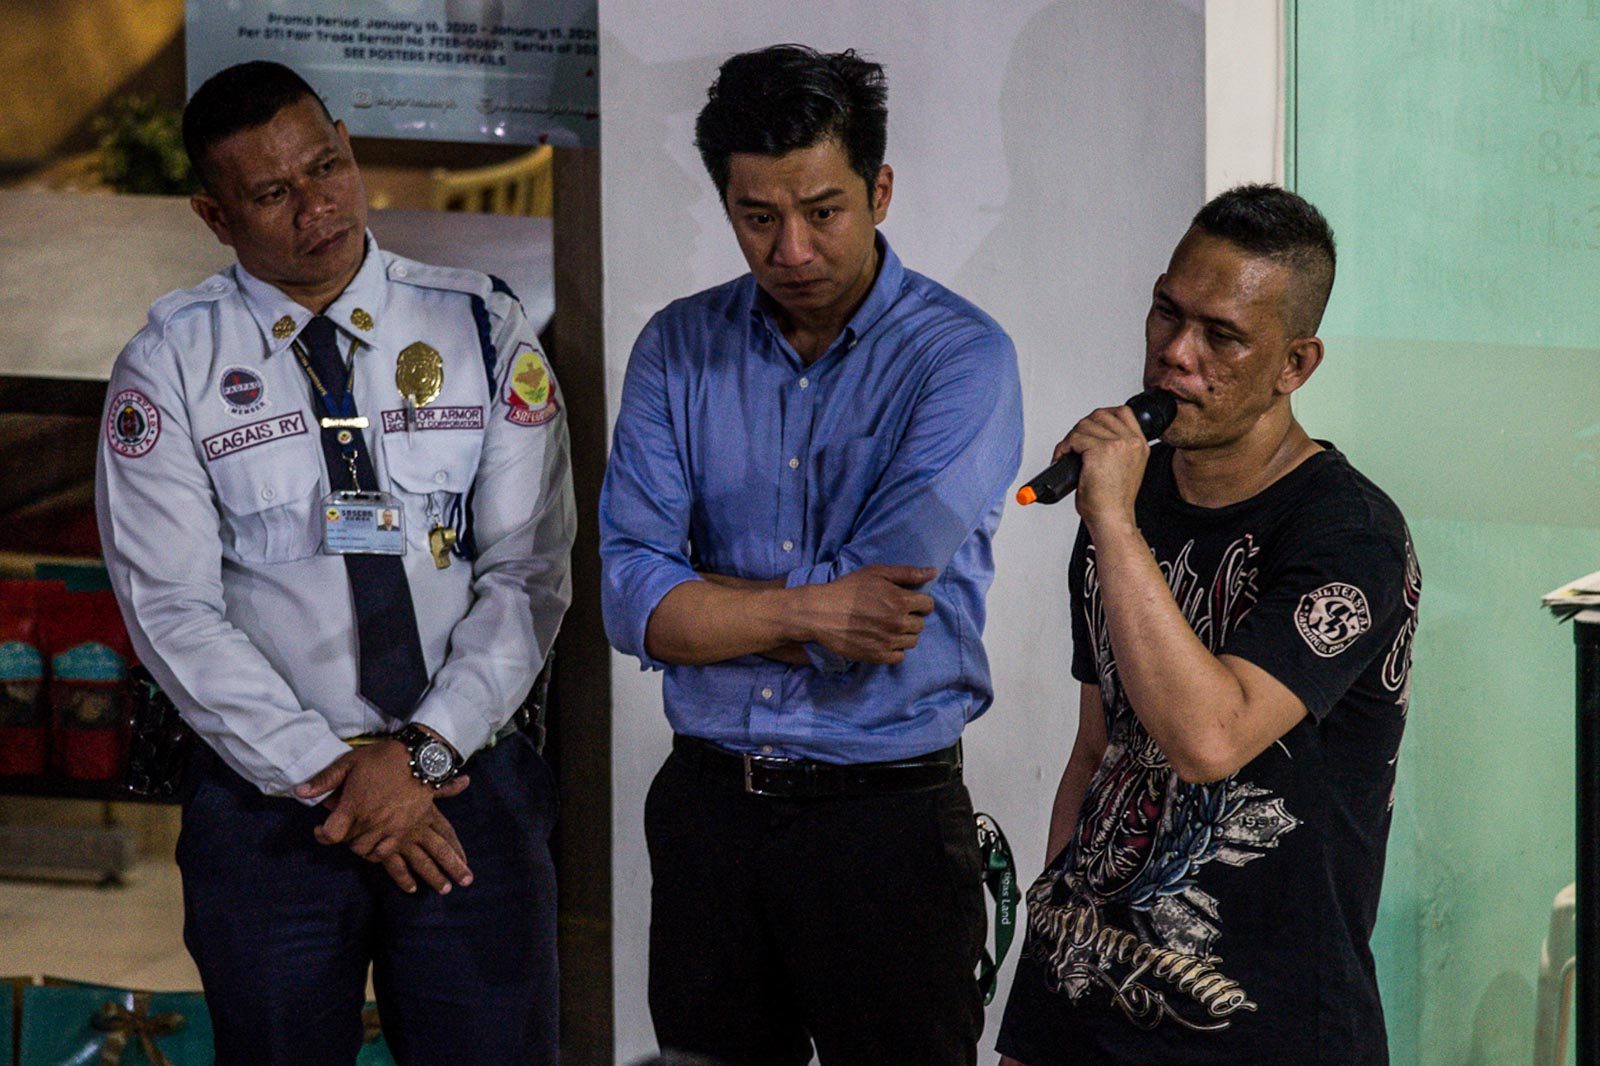 Greenhills hostage taker refused P1M: ‘He needed to be heard’